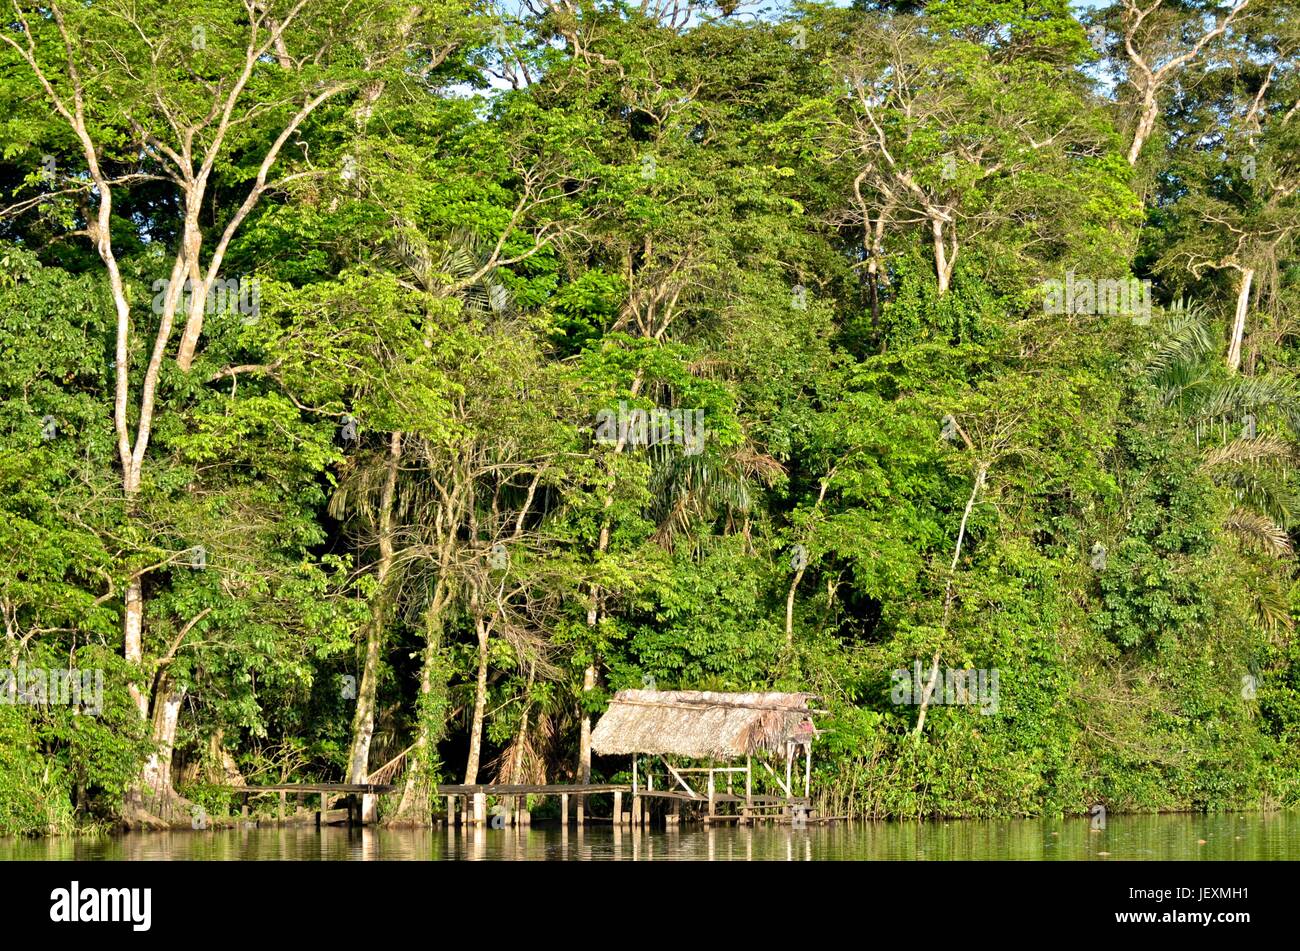 Tropical rainforest in Humedal Caribe Noreste at Tortuguero National Park. Stock Photo